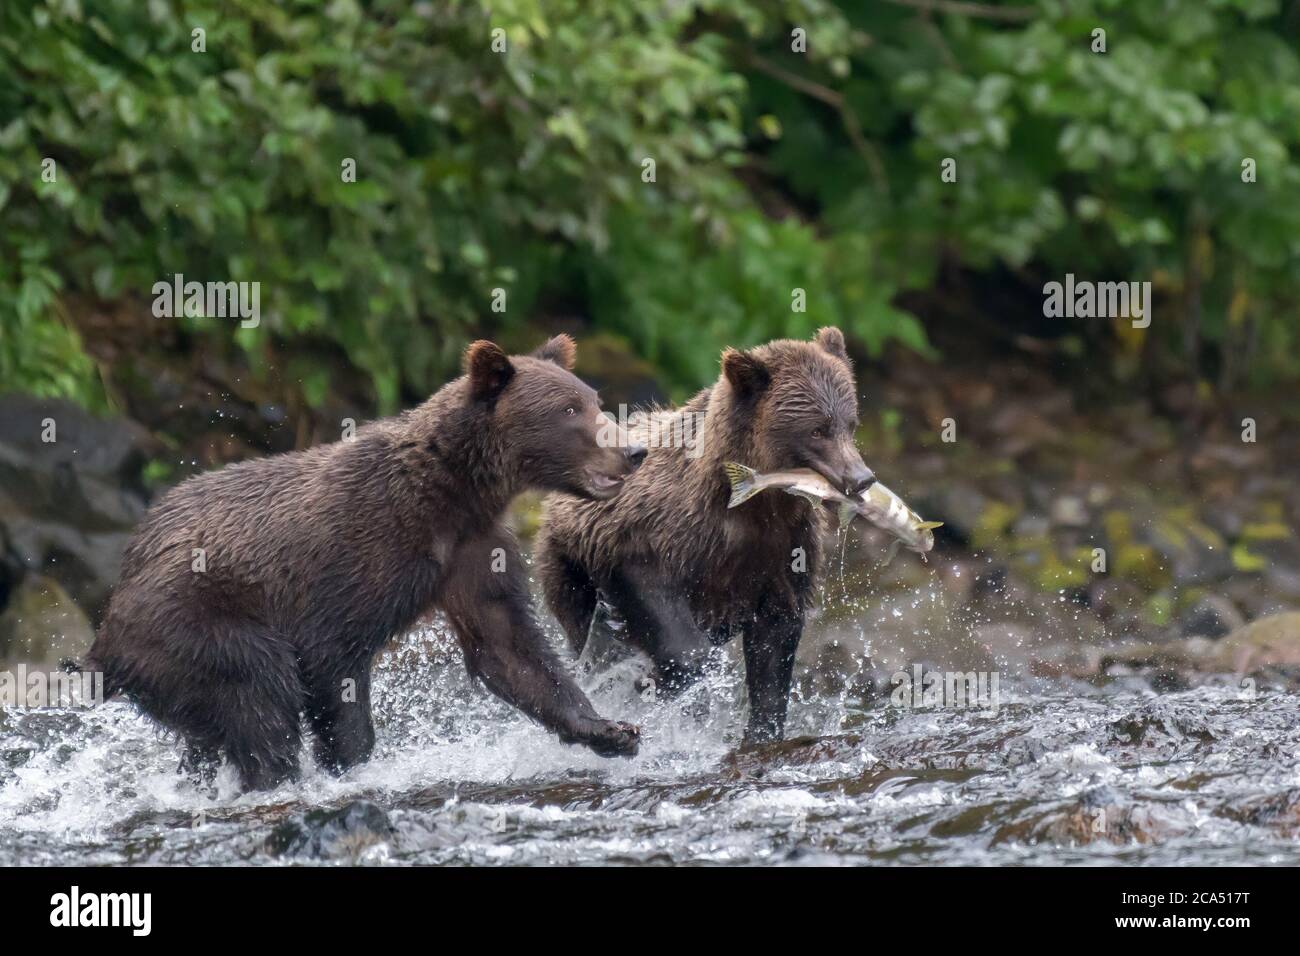 Coastal Brown (Grizzly) Bear (Ursus arctos) running through an river carrying a salmon with another bear running alongside. Stock Photo